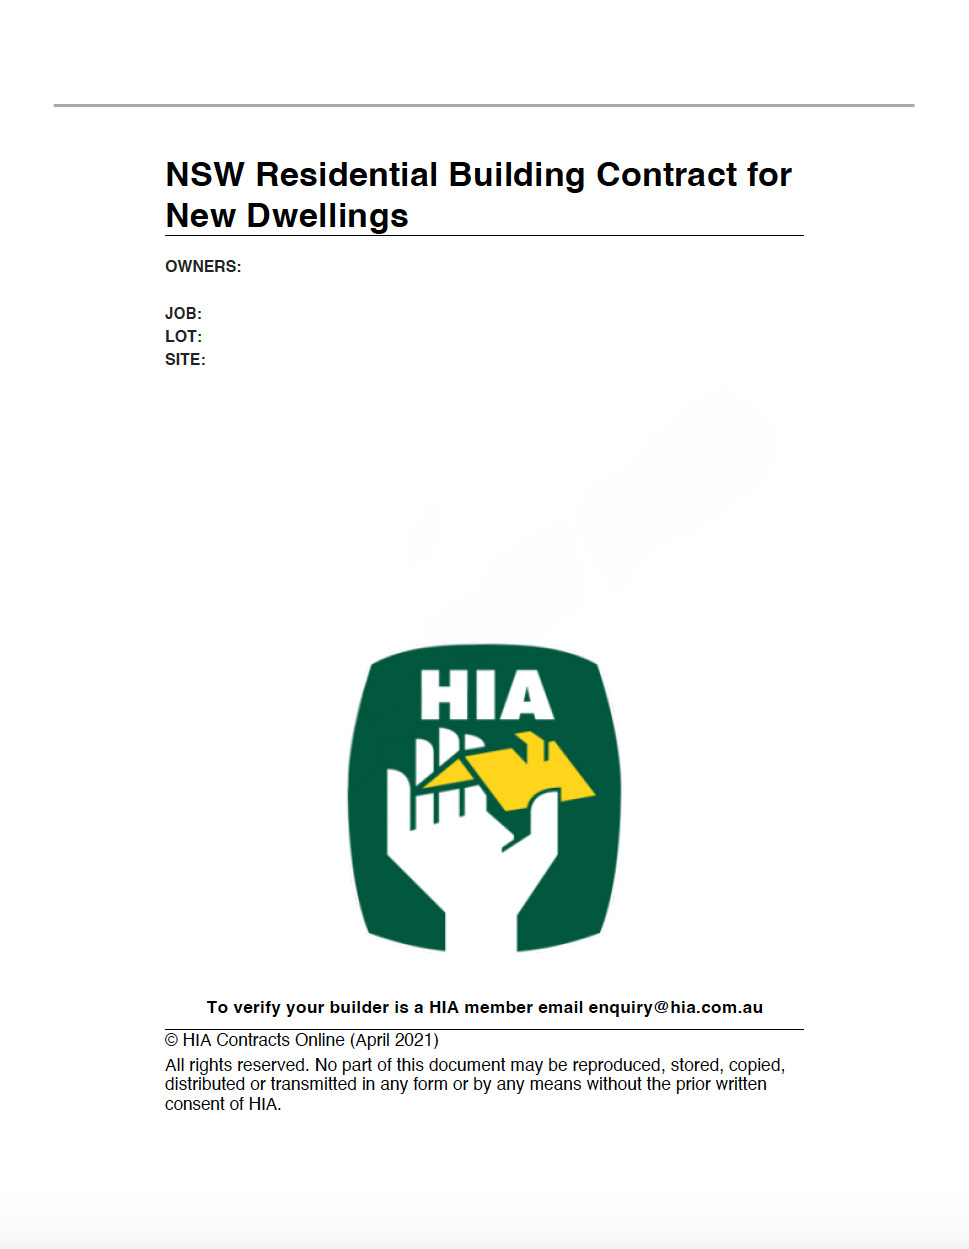 HIA building contract template